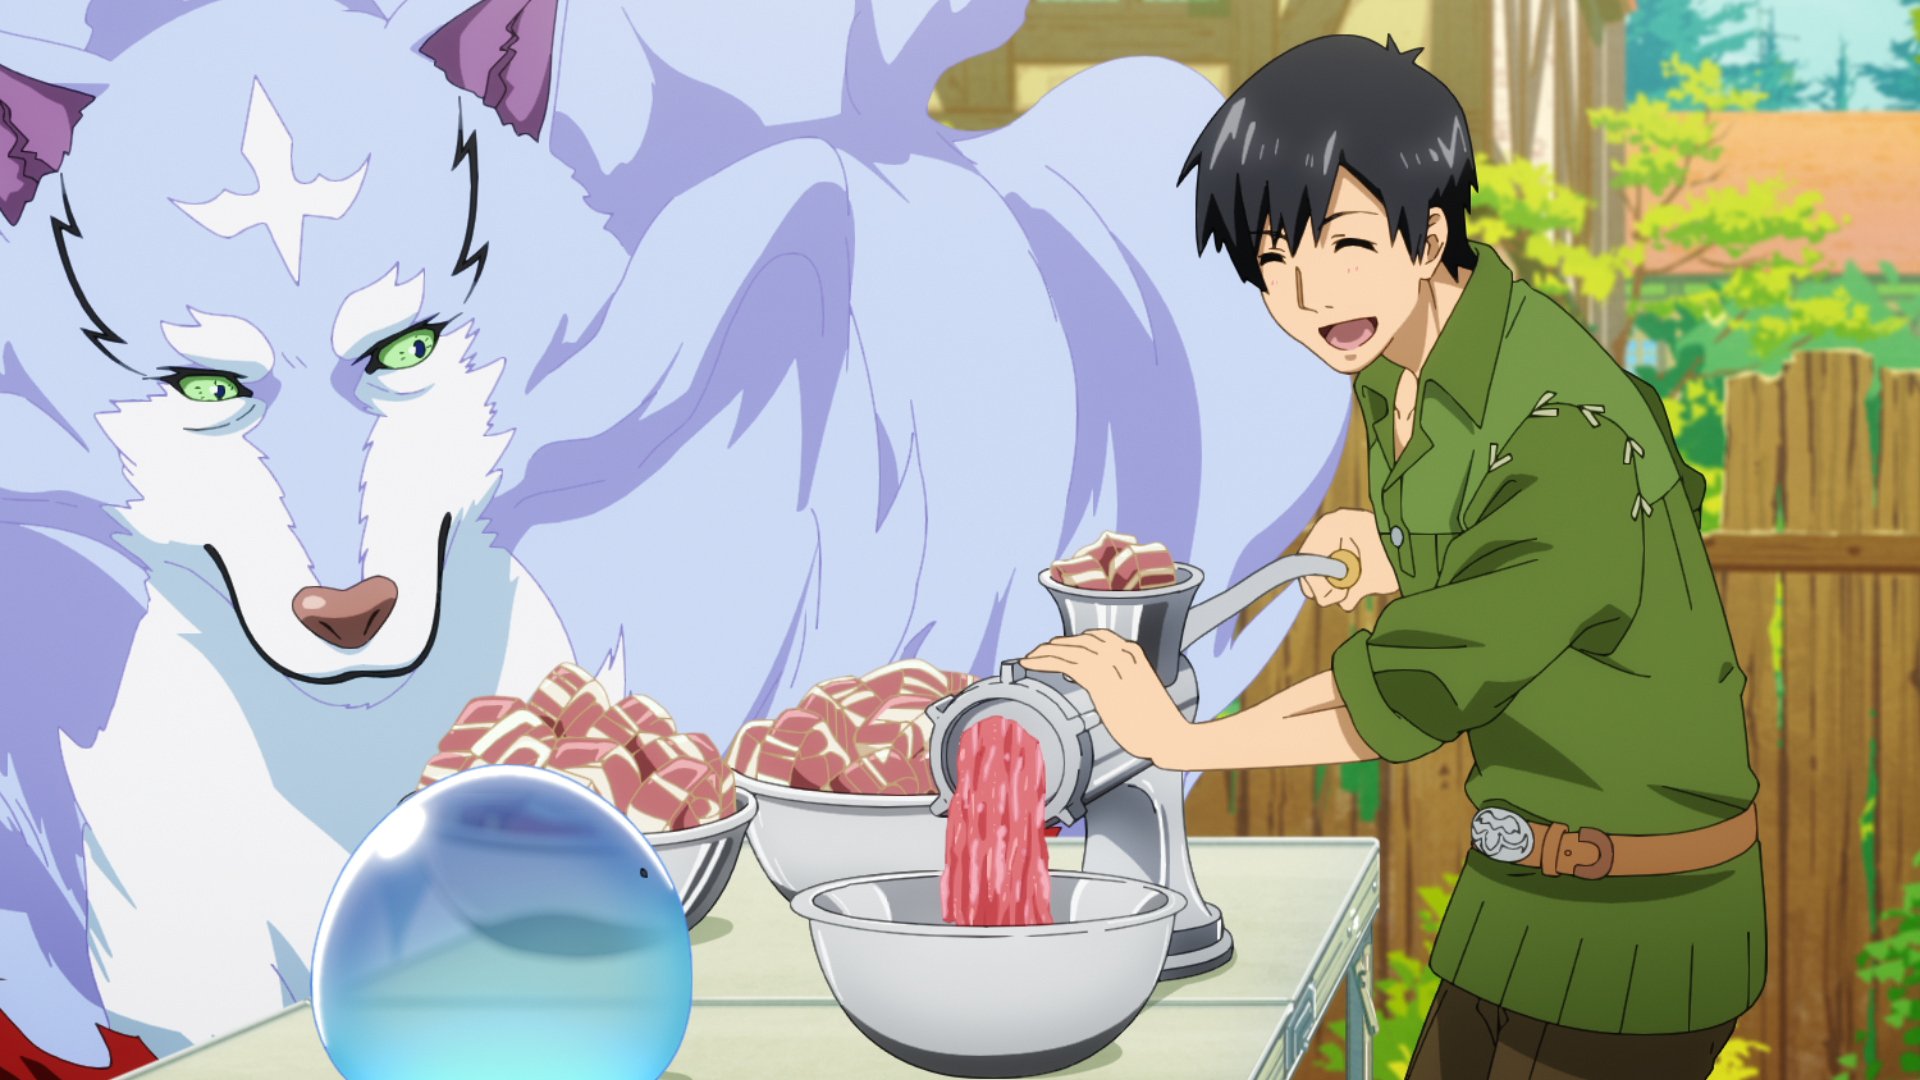 Watch Campfire Cooking in Another World with My Absurd Skill - Crunchyroll